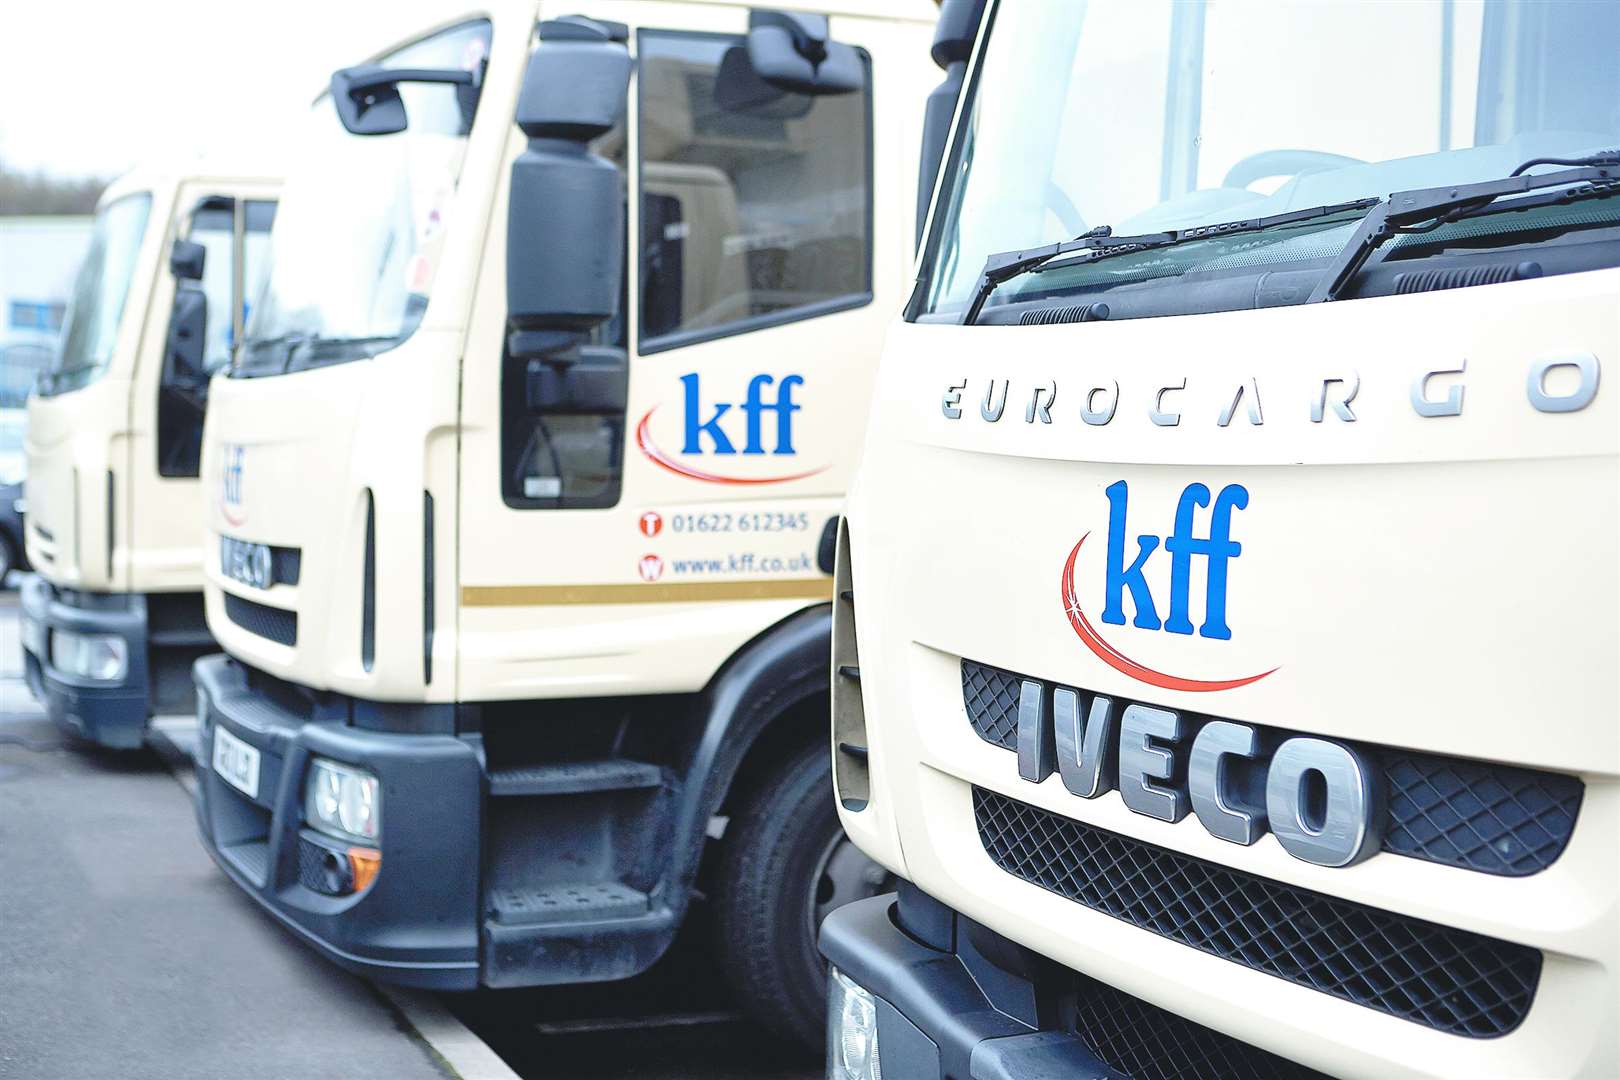 Sysco has completed its takeover of frozen food wholesaler and distributor kff